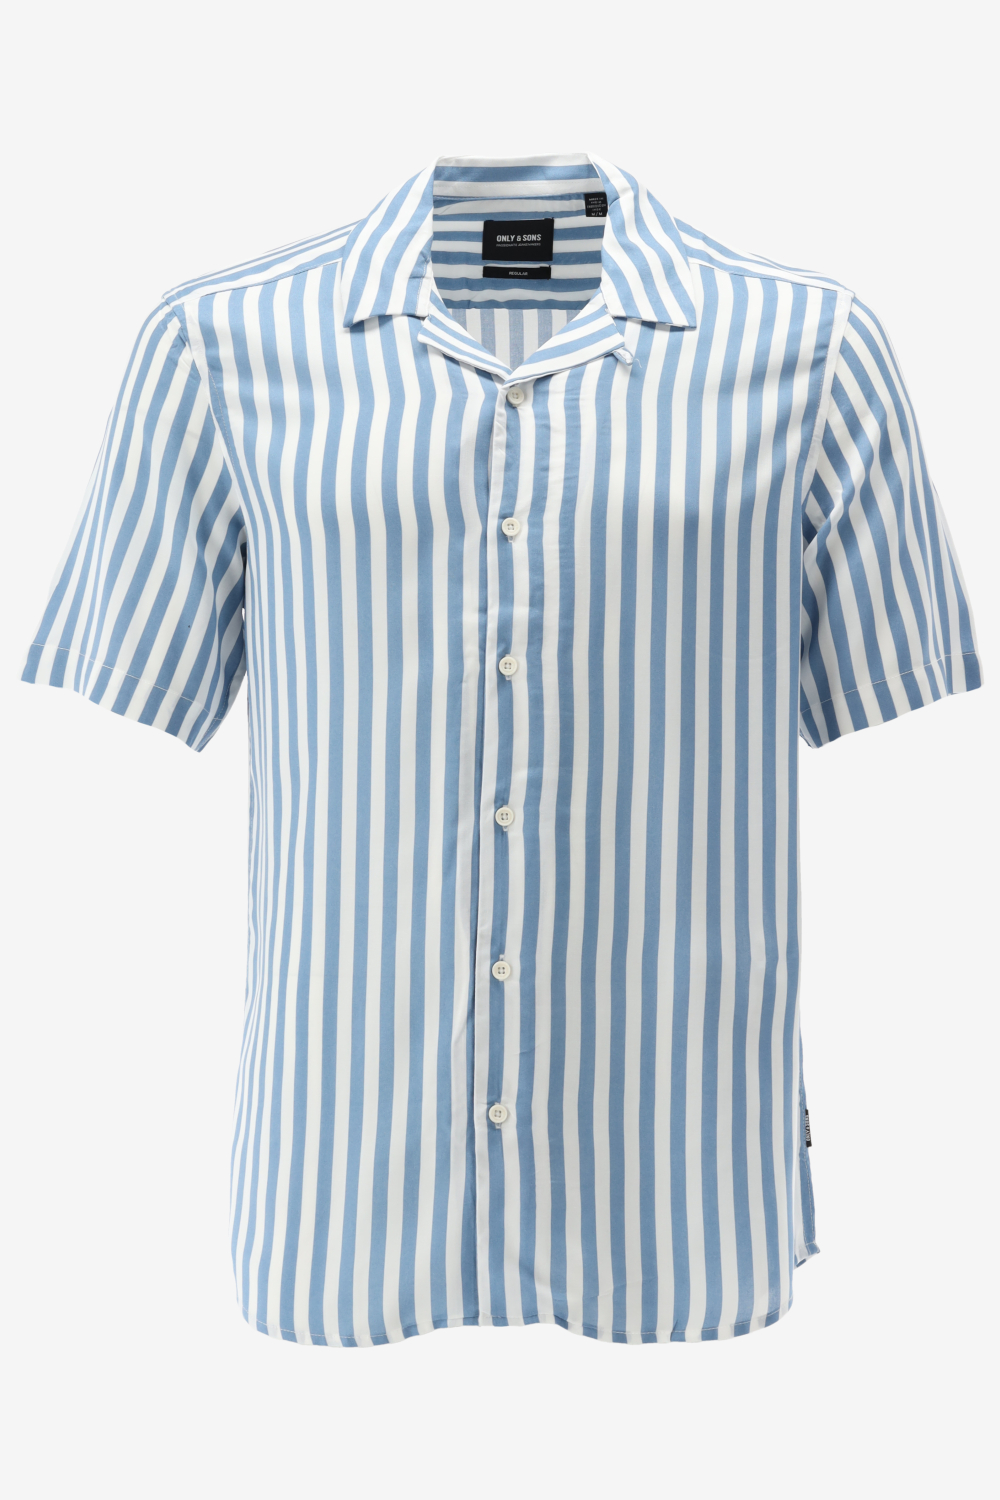 Only & Sons Casual Shirt WAYNE